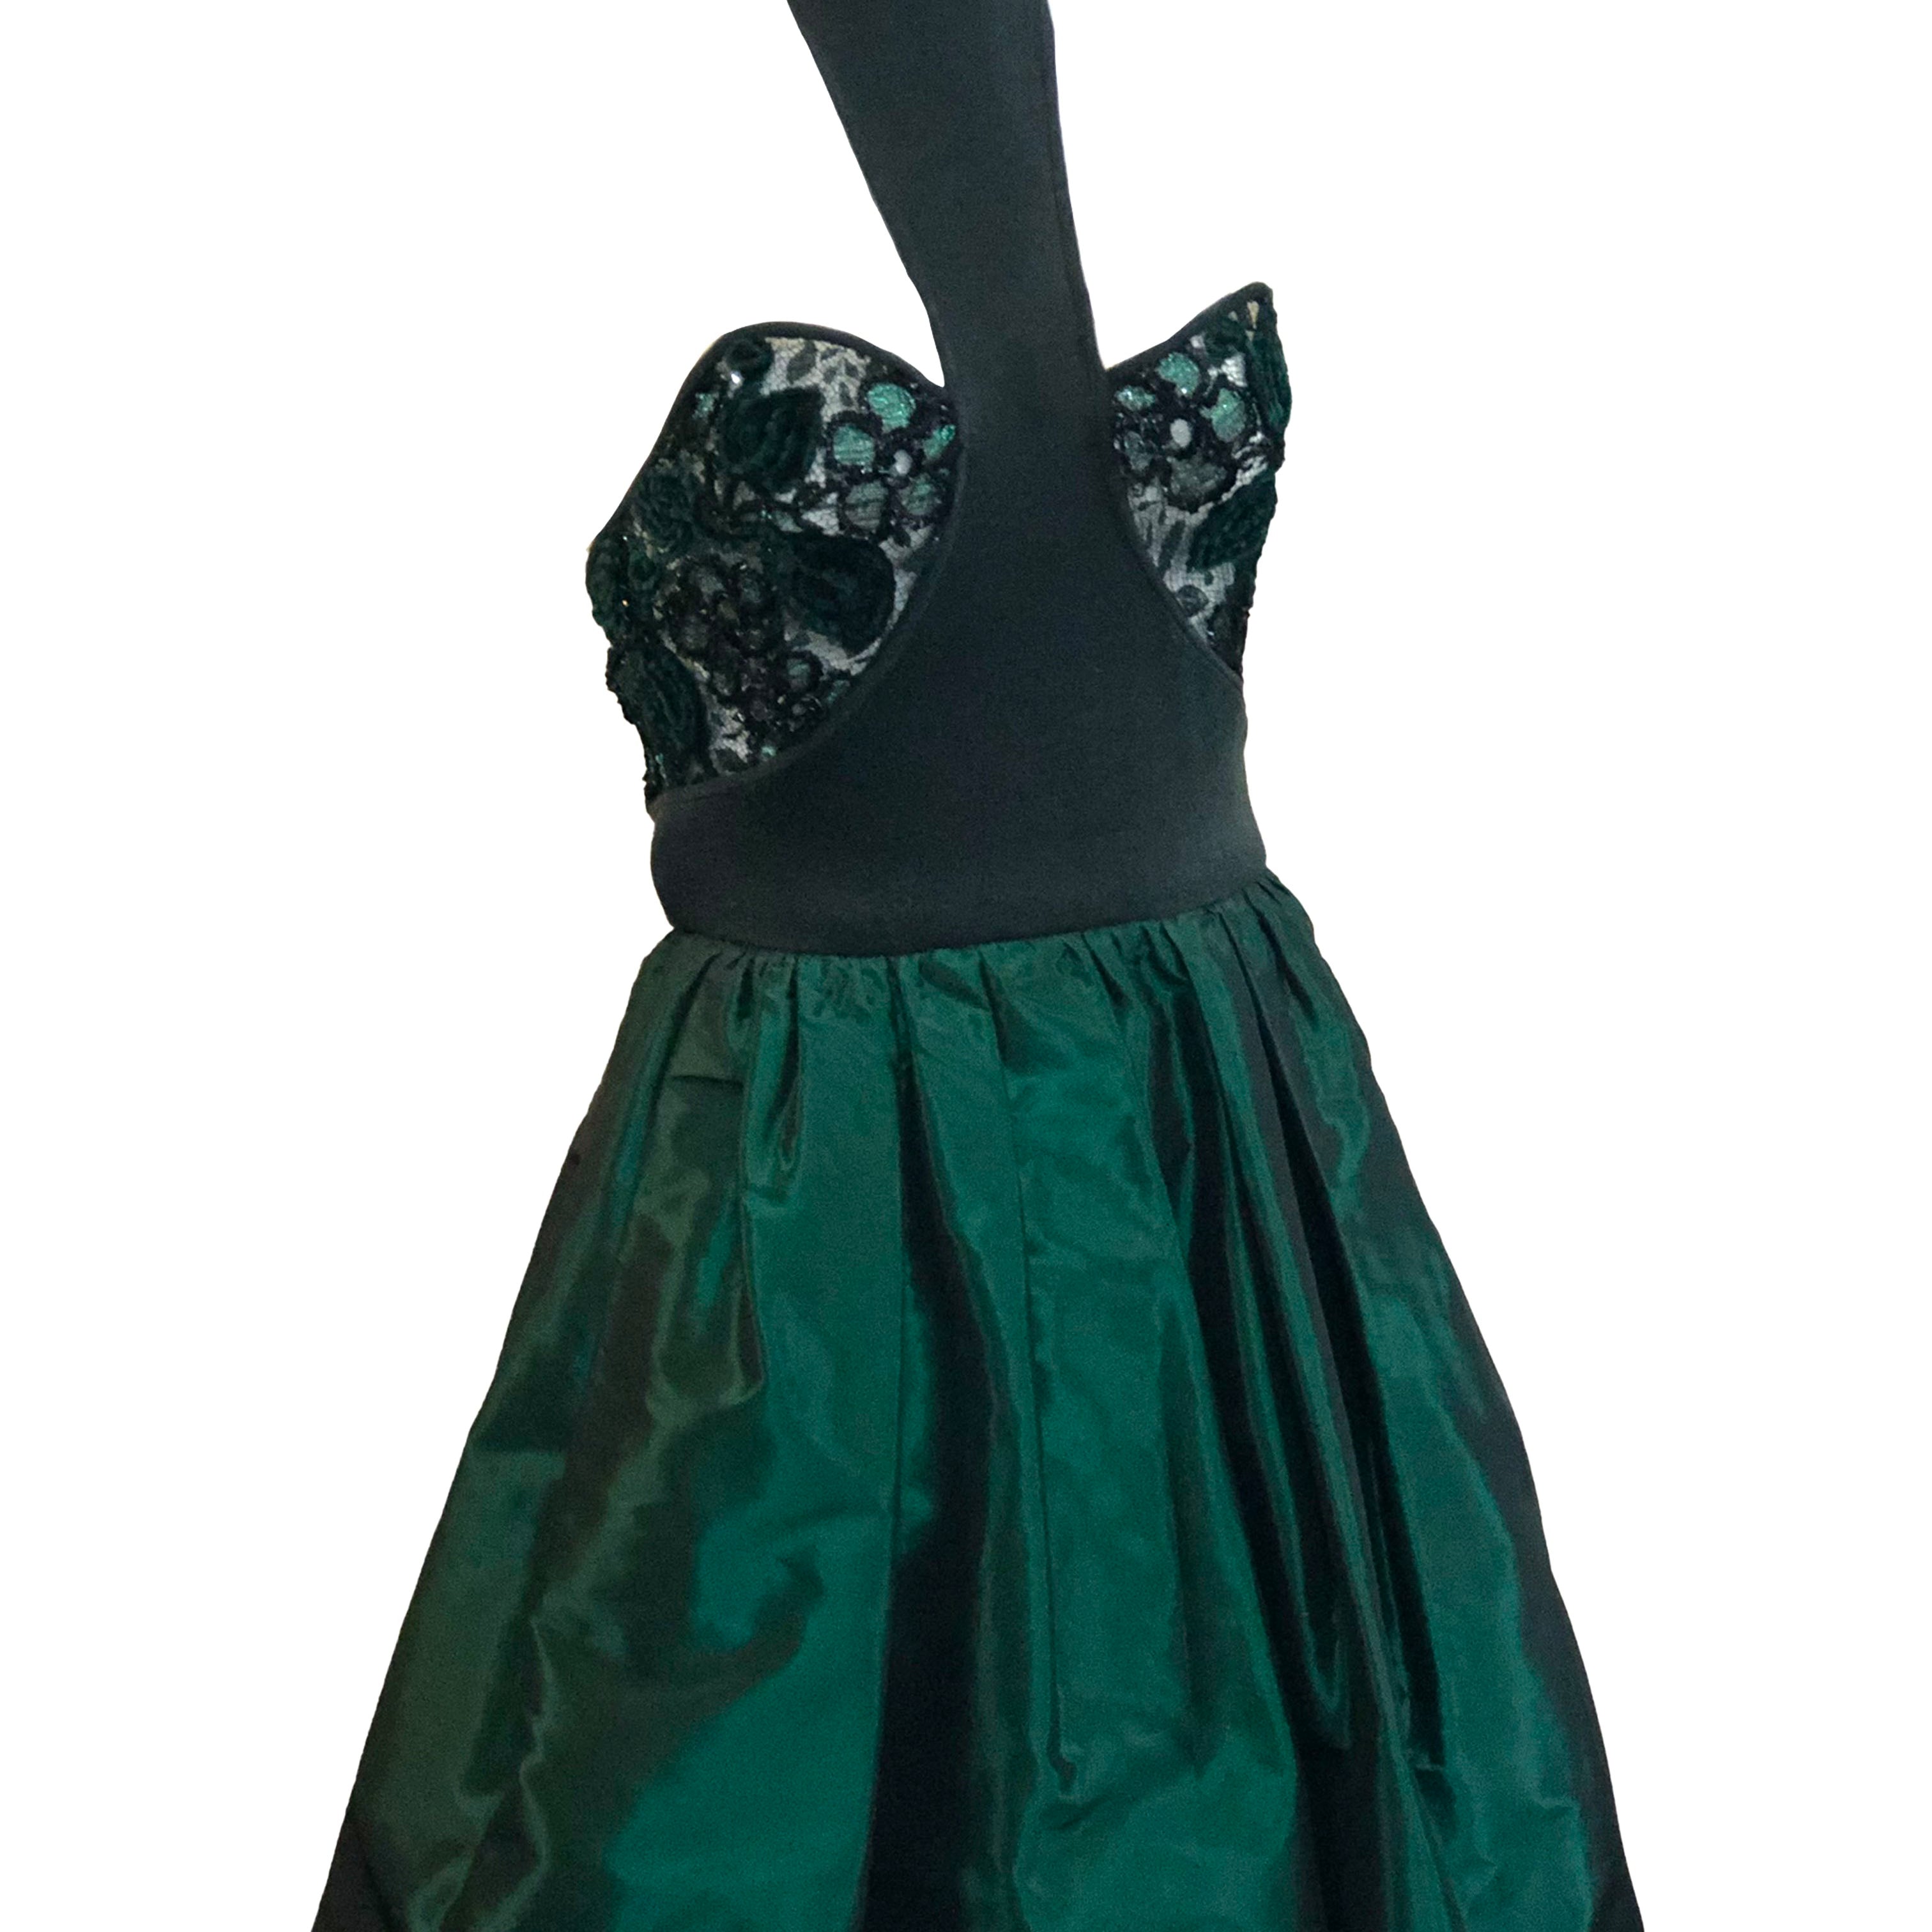 James Galanos 80s Emerald Green Taffeta and Lace Party Dress ANGLE 2 of 6